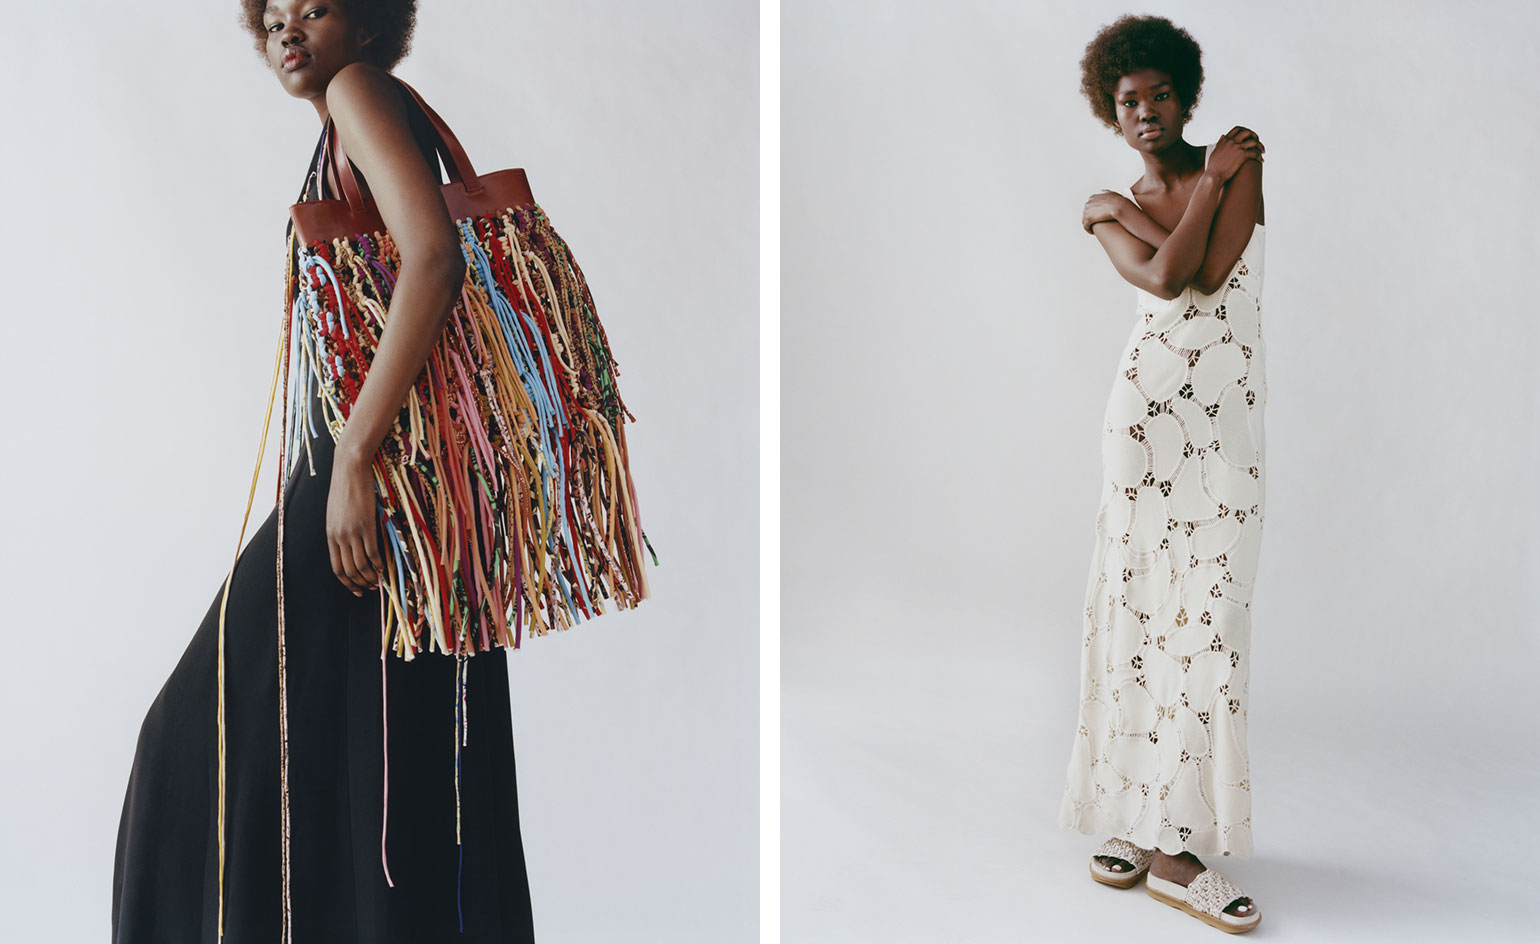 Chloé seamlessly weaves together style and sustainability